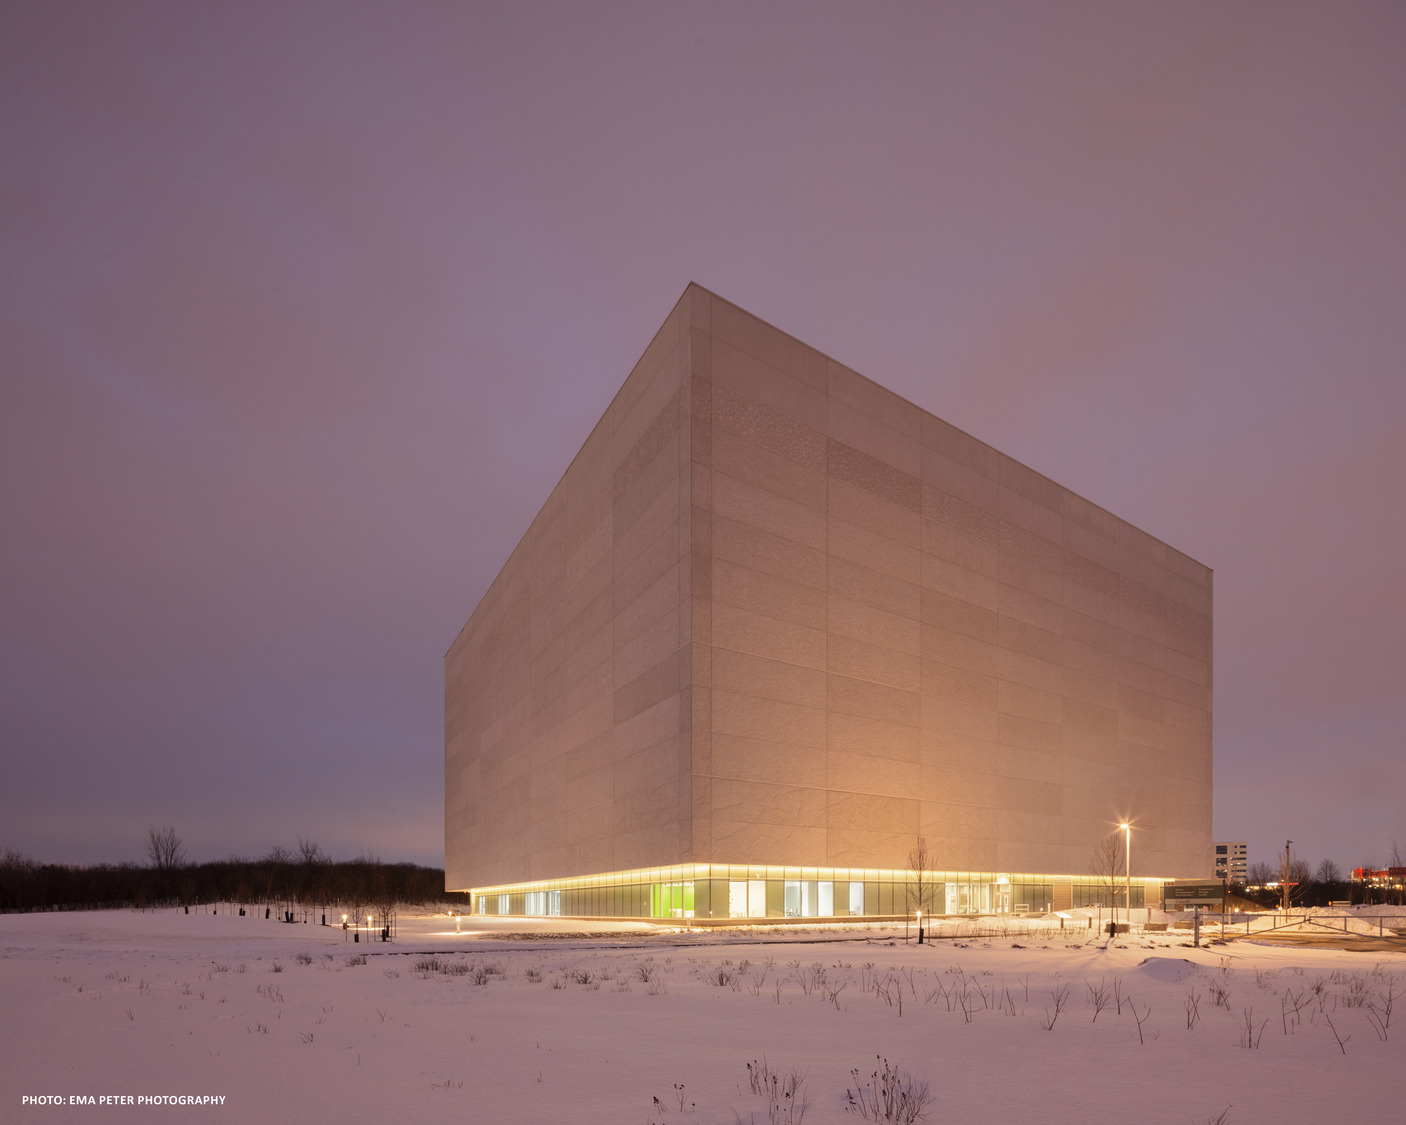 A modern, cube-shaped building illuminated at dusk, surrounded by a snowy landscape under a cloudy sky.